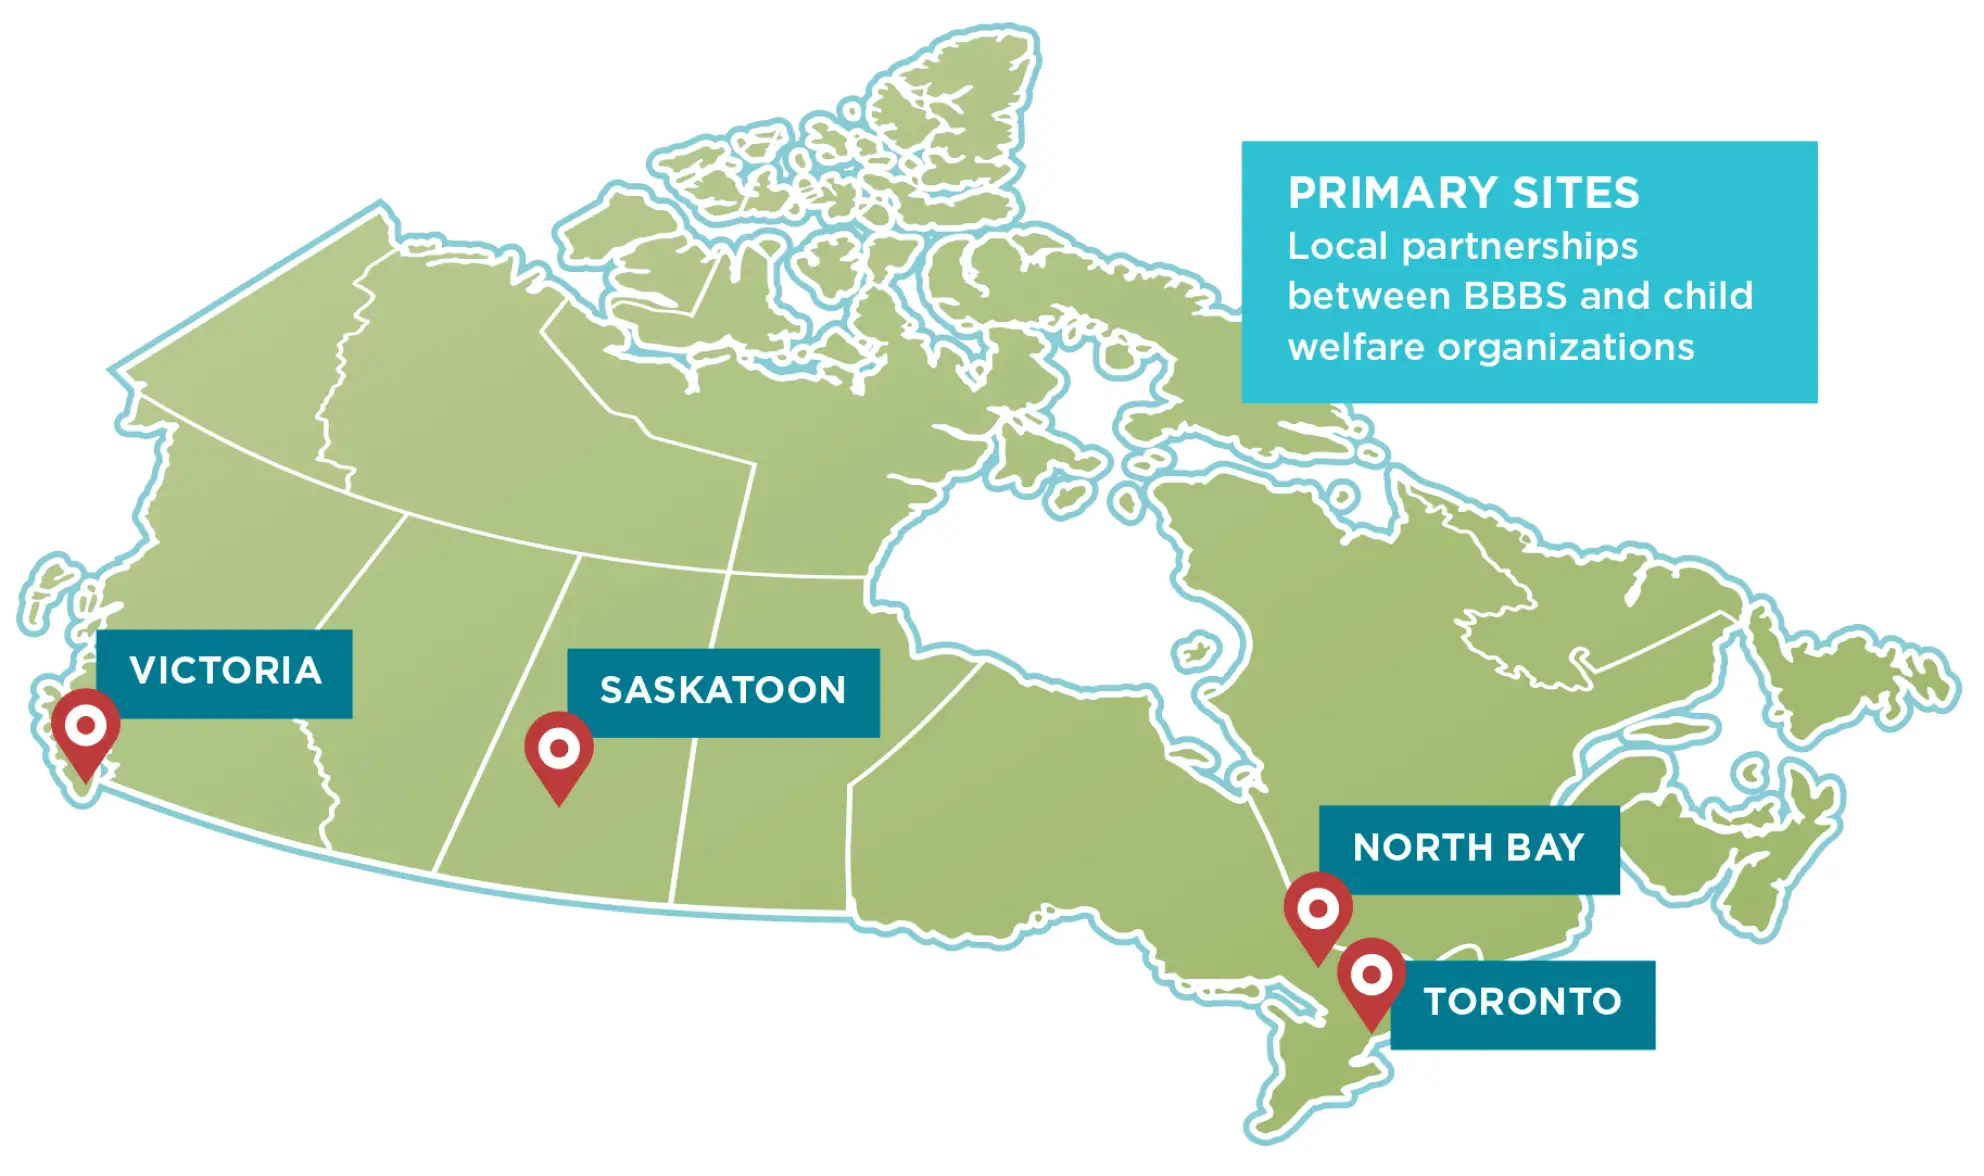 Primary sites map of Canada